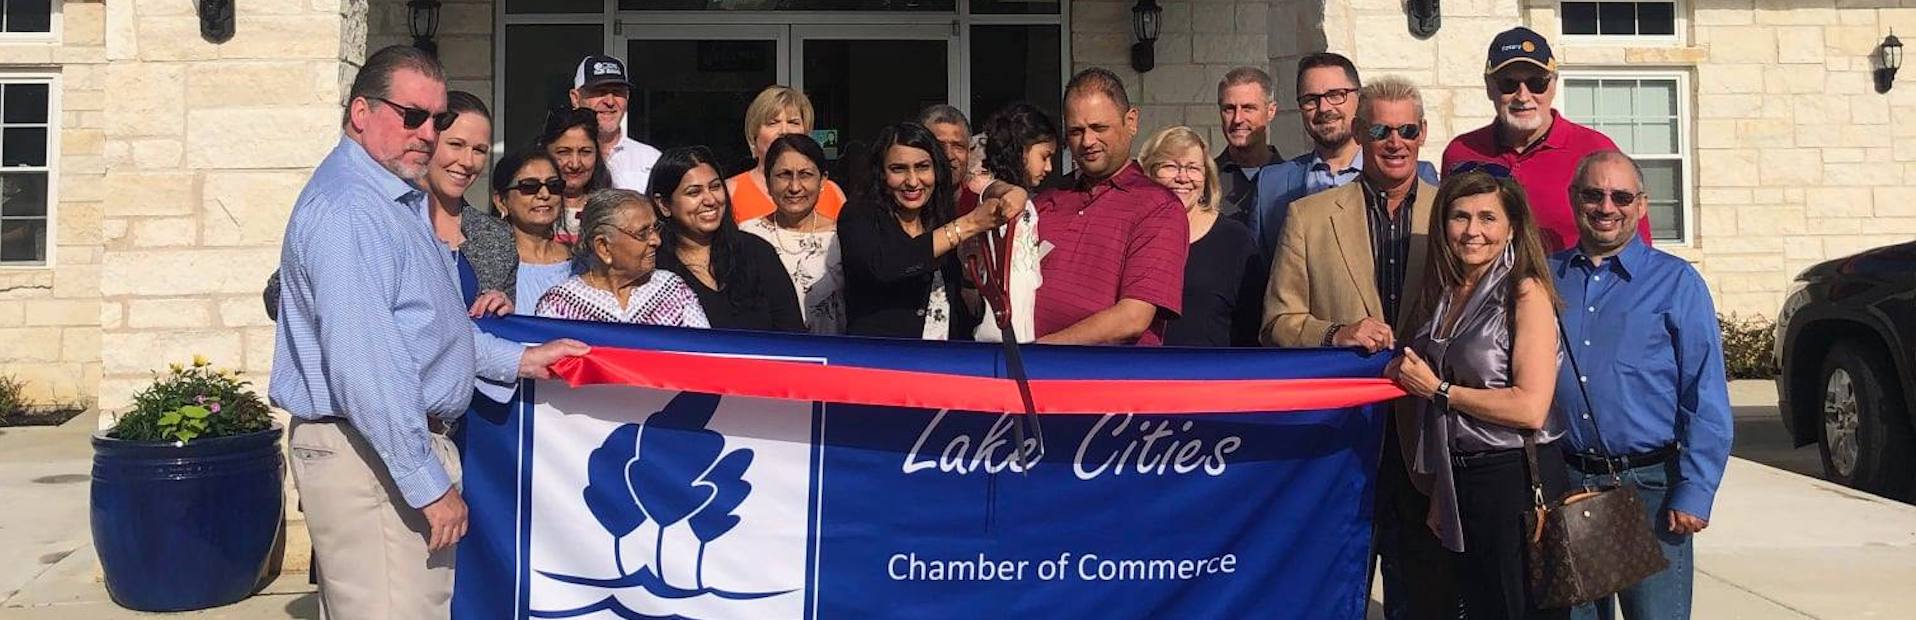 Lake Cities Chamber of Commerce | Children's Lighthouse | Ribbon Cutting | 05-26-21